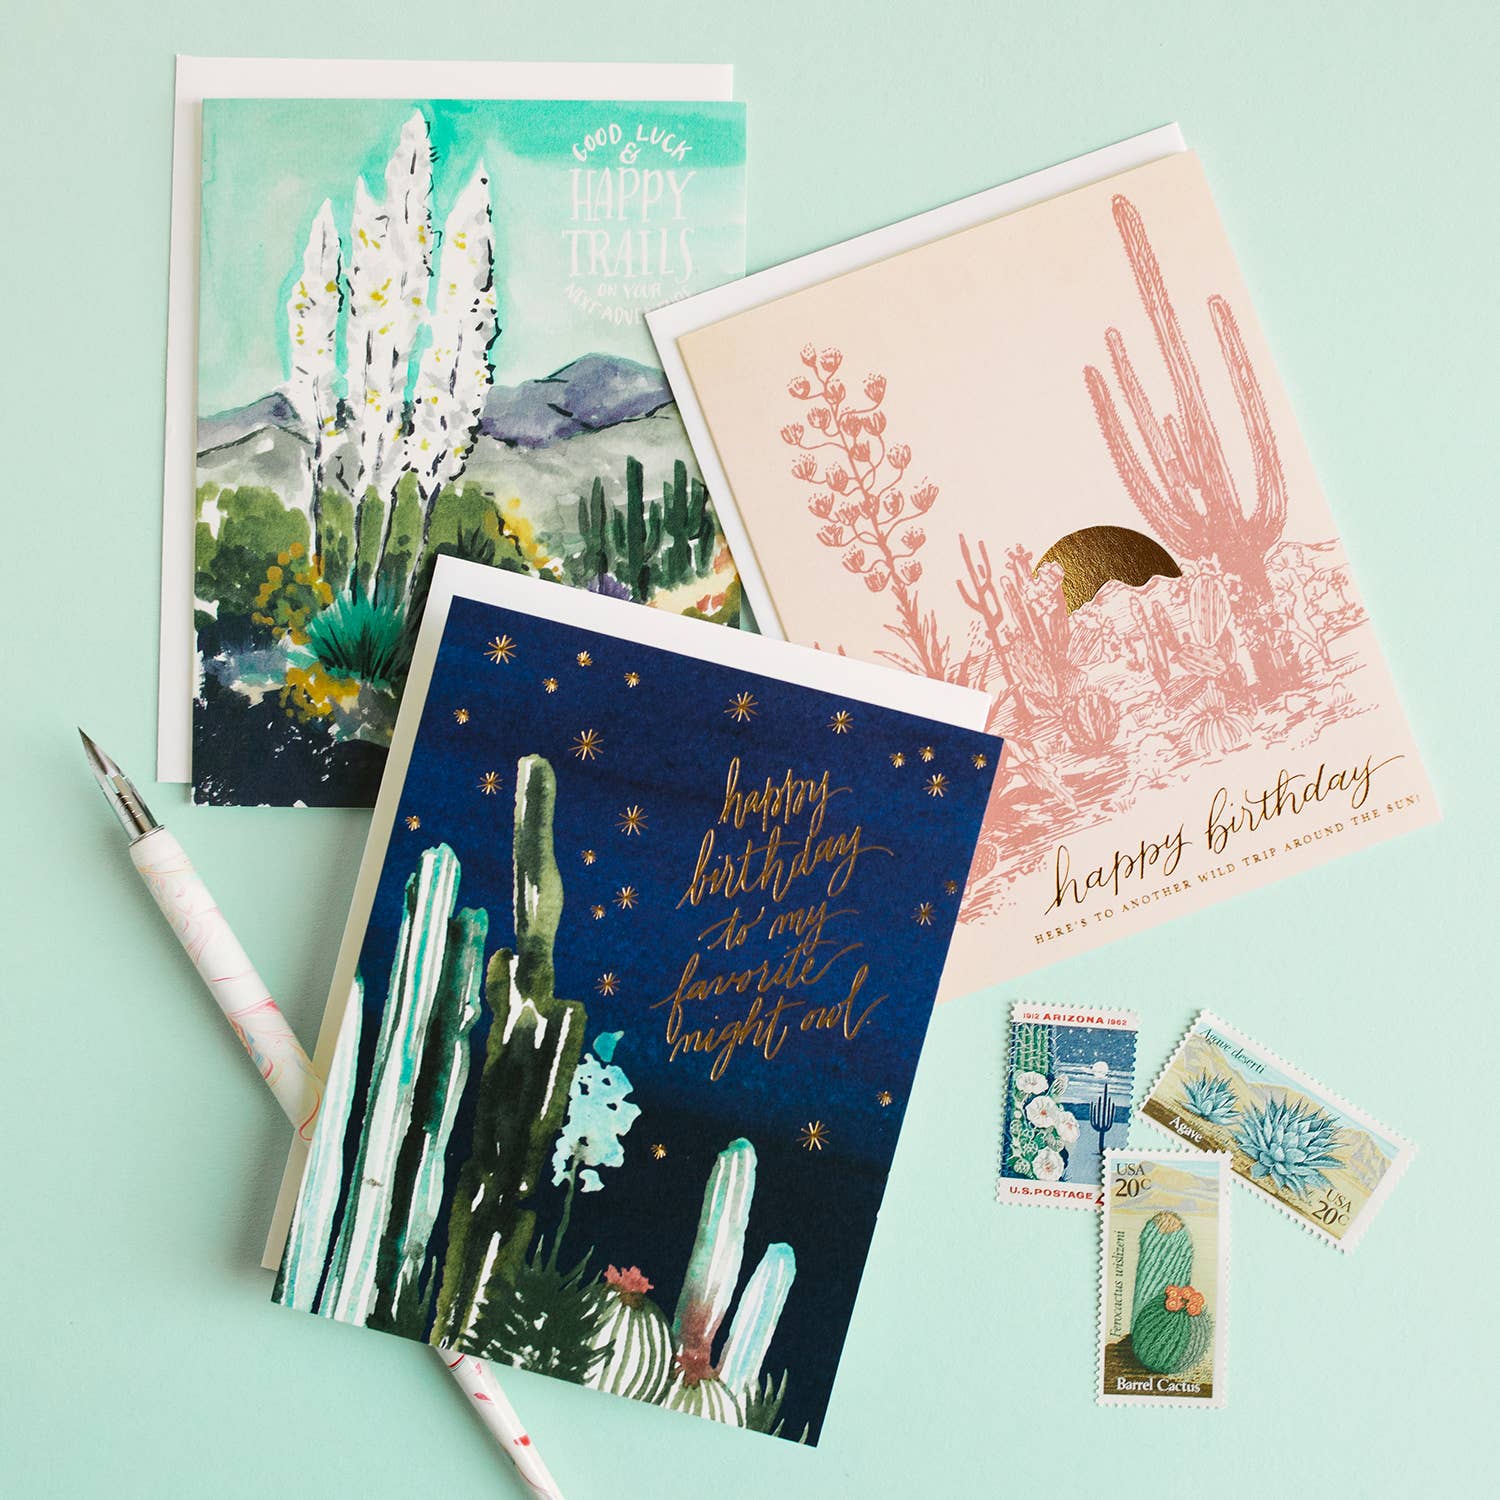 Supplies for Stationery Nerds and Journal Lovers (at a Scrapbook Site) - An  Artful Mom